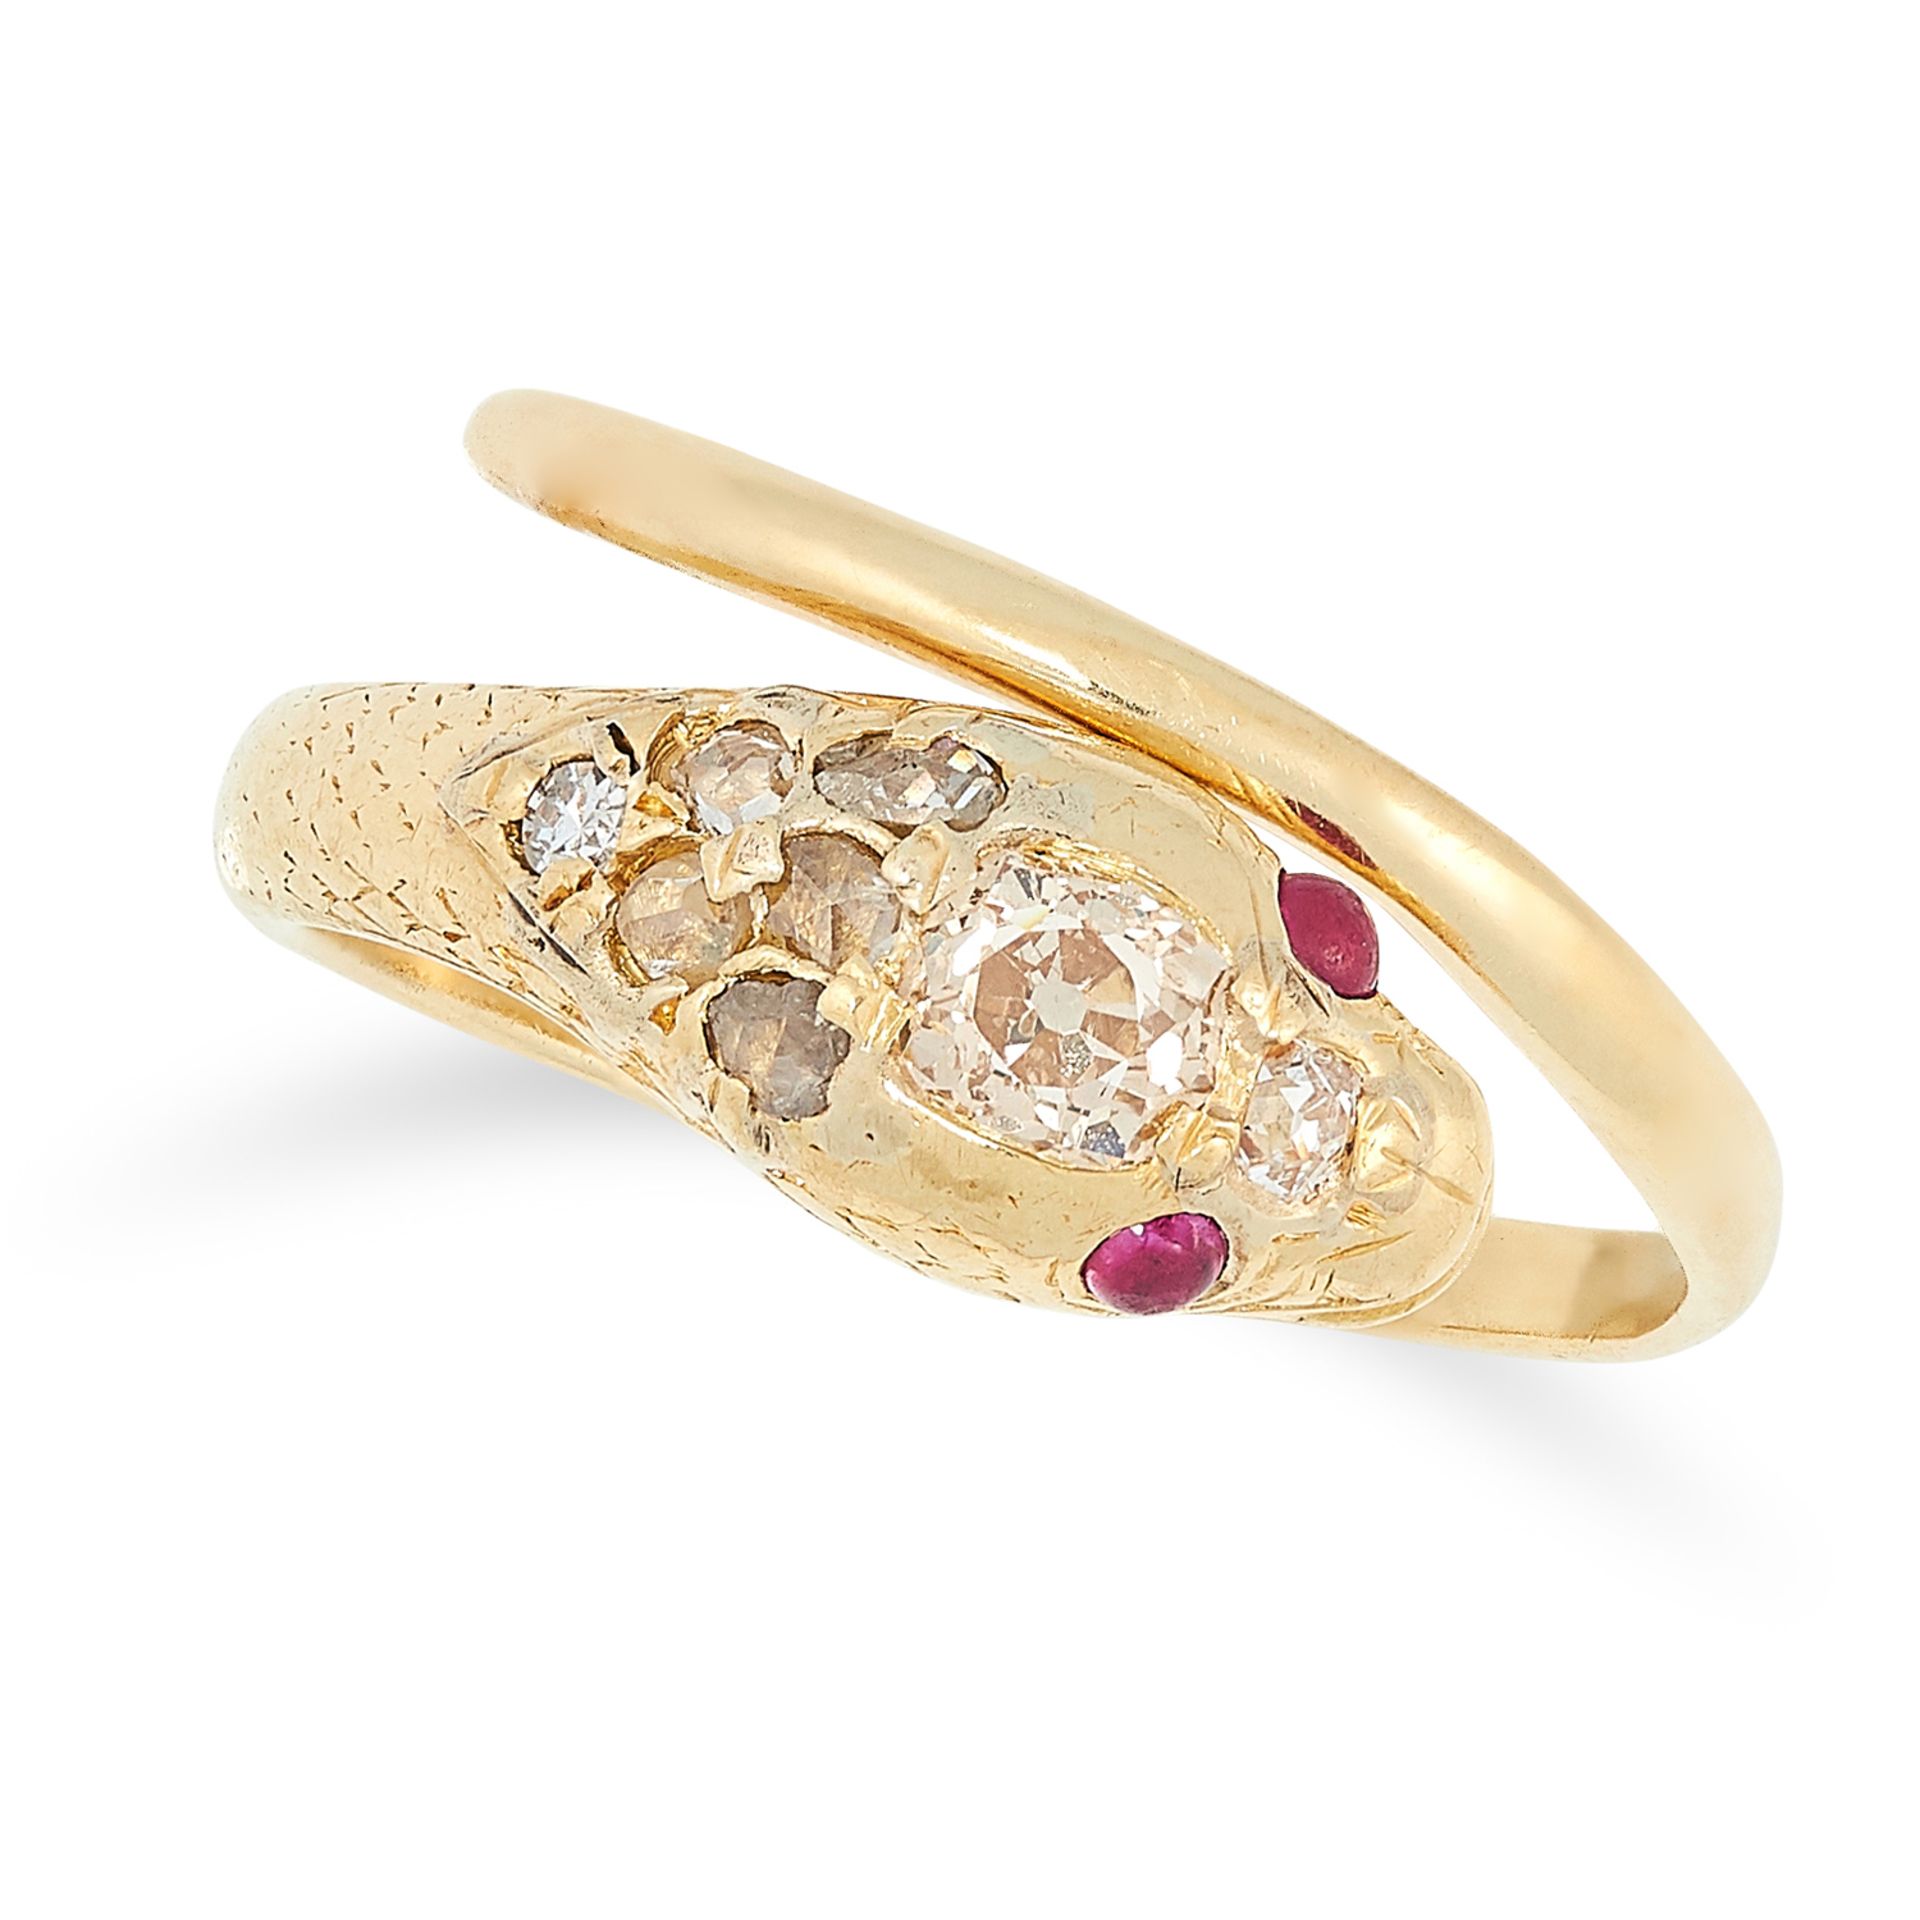 AN ANTIQUE RUBY AND DIAMOND SNAKE RING set with old cut diamonds and rubies, size O / 7, 4.1g.